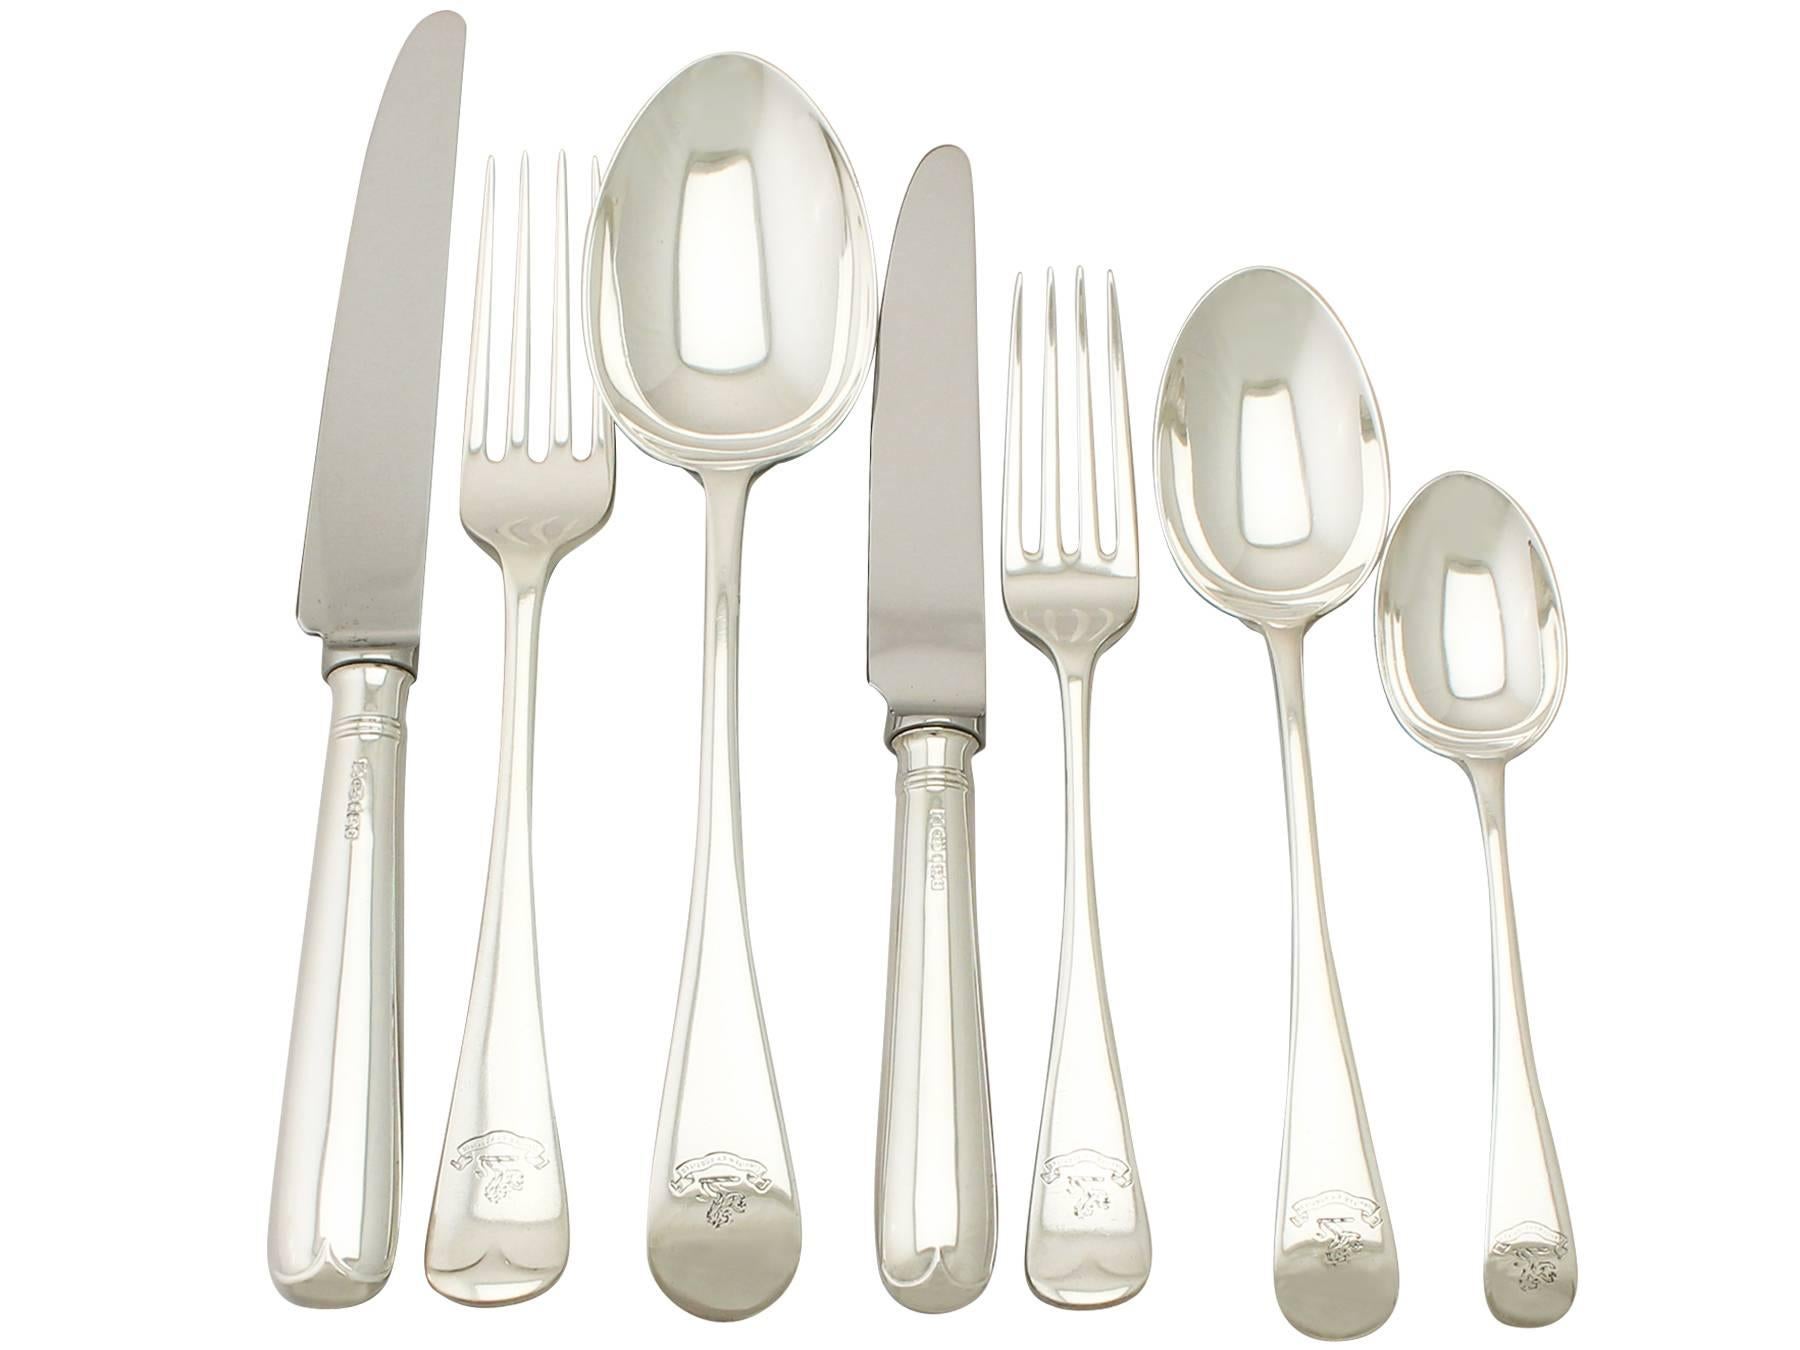 An exceptional, fine and impressive antique Edwardian English sterling silver straight Old English pattern flatware set / service for 12 persons; an addition to our canteen of cutlery collection.

The pieces of this exceptional, antique Edwardian